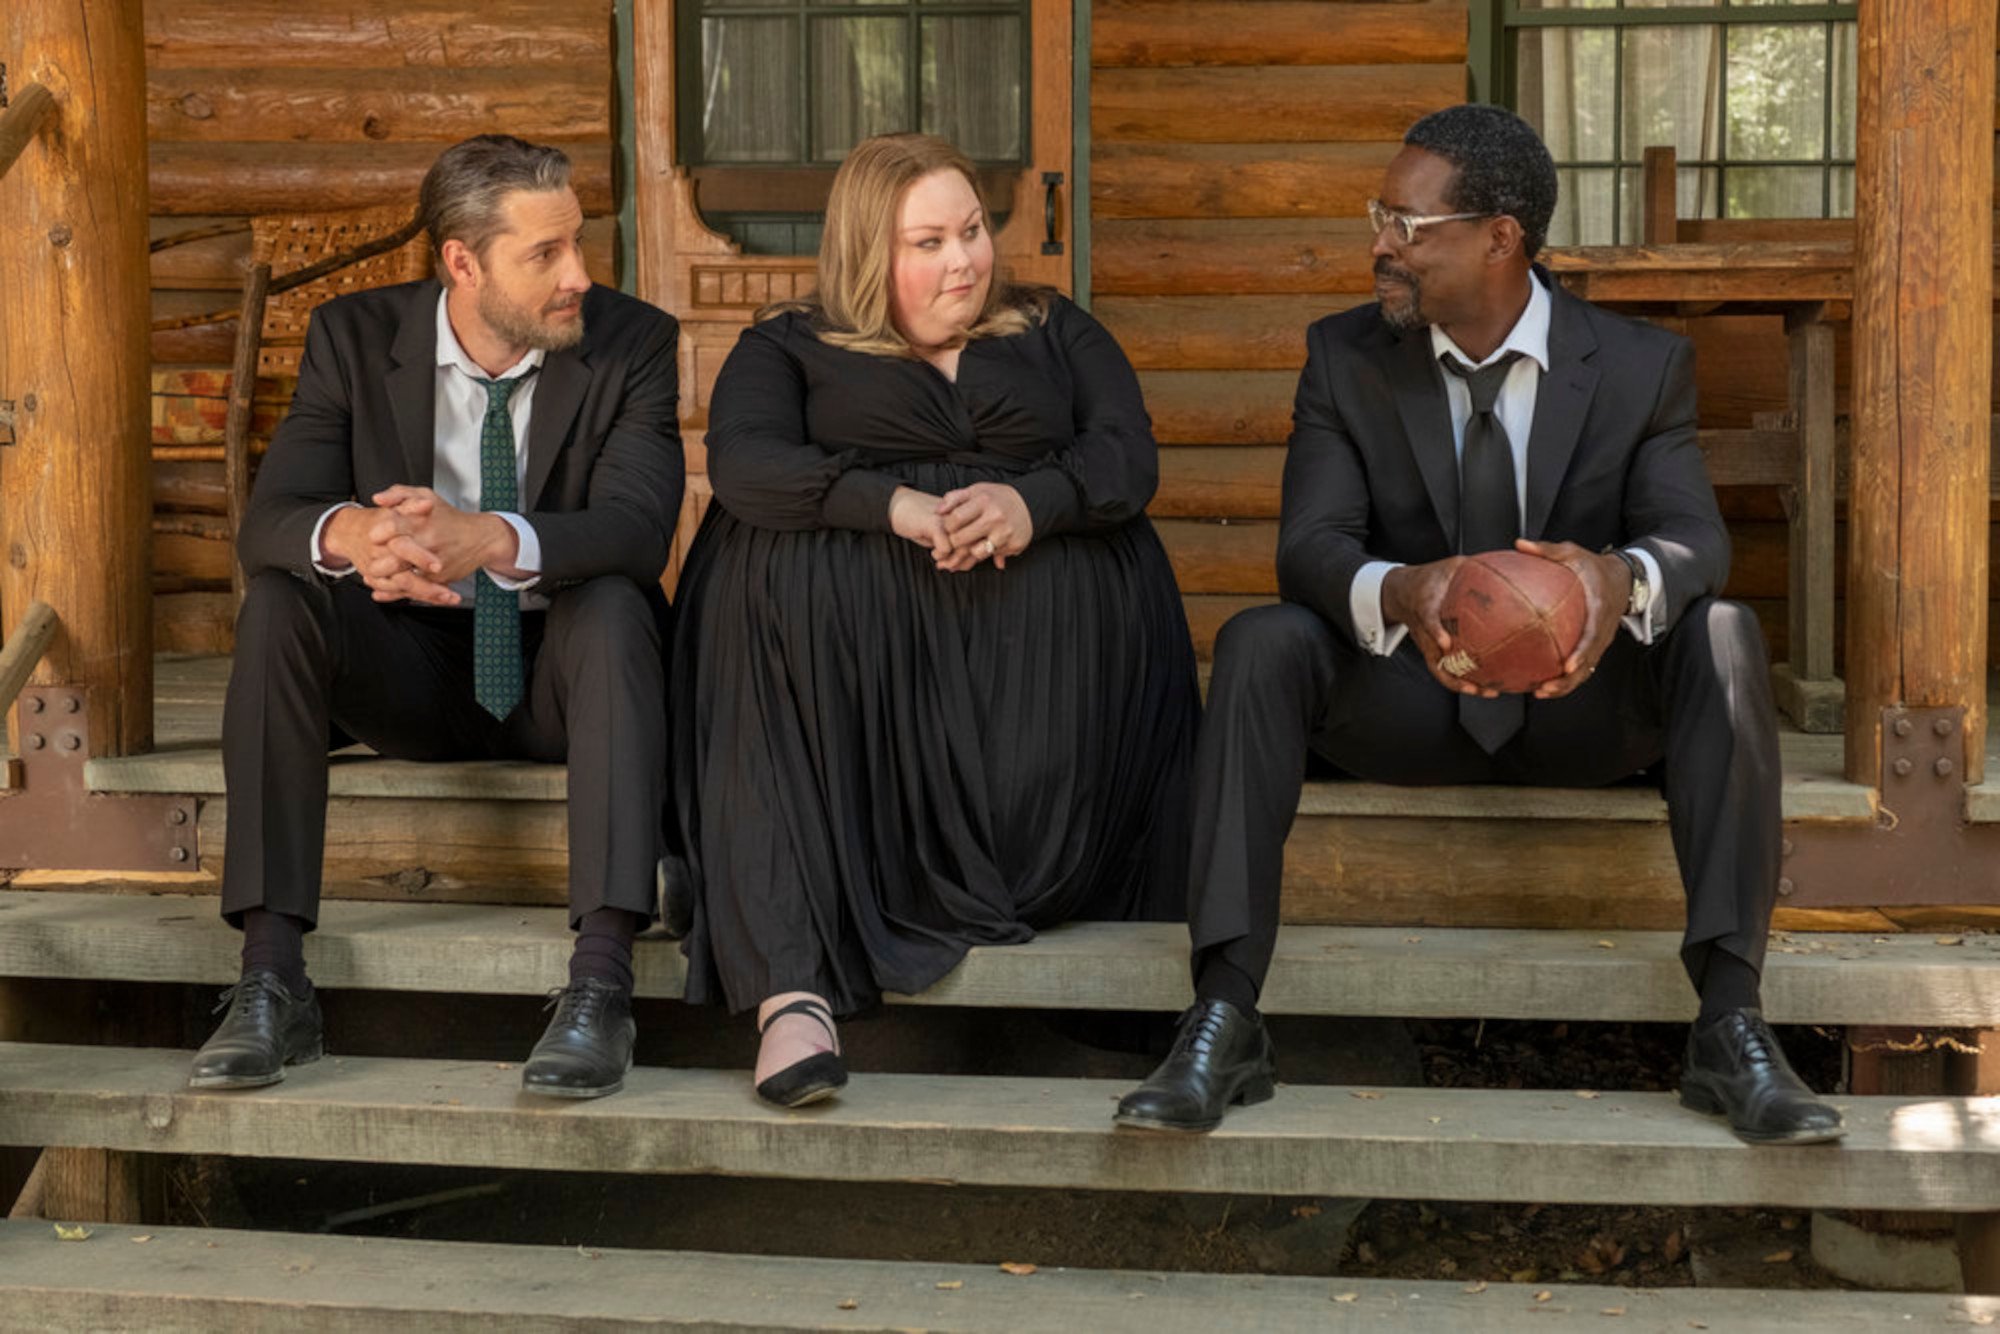 Justin Hartley as Kevin, Chrissy Metz as Kate, Sterling K. Brown as Randall in 'This Is Us' Season 6 Episode 18. One 'This Is Us' theory posits the Big 3 will be affected by Dr. Marcus Brooks' research. In this photo, they're sitting on the porch at Rebecca's funeral. They're wearing black and talking to one another.